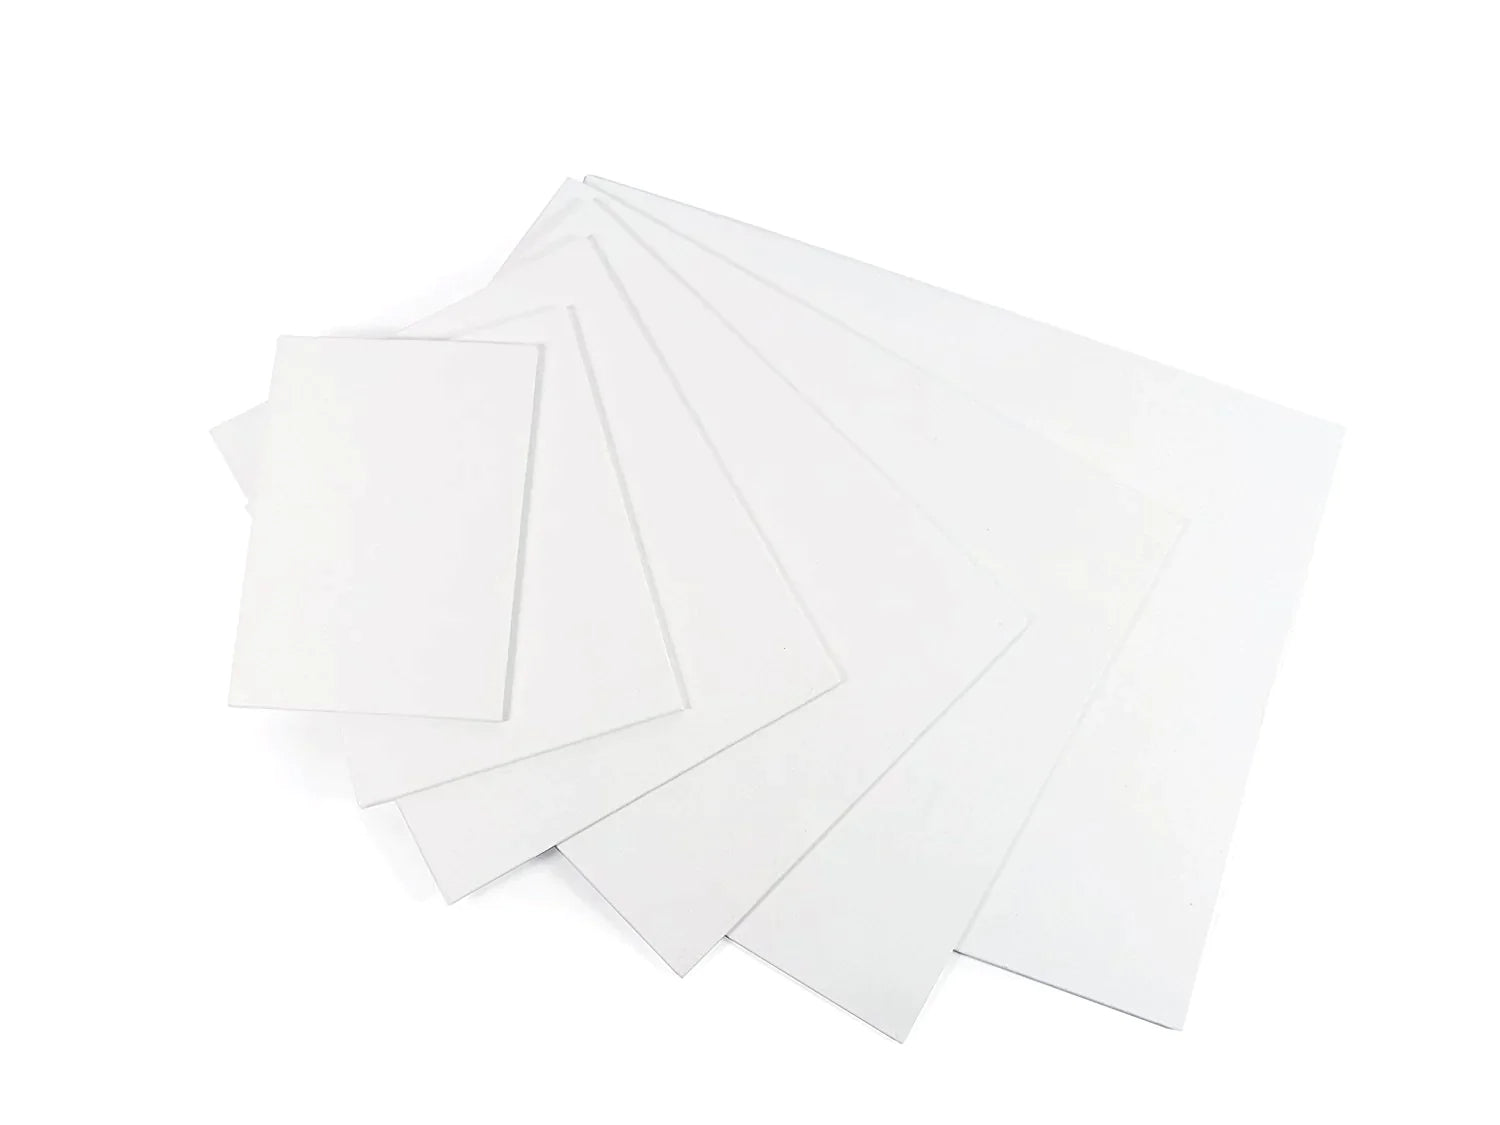 Crystal Clear Archival, Acid-Free Cellophane Bags - Package of 25